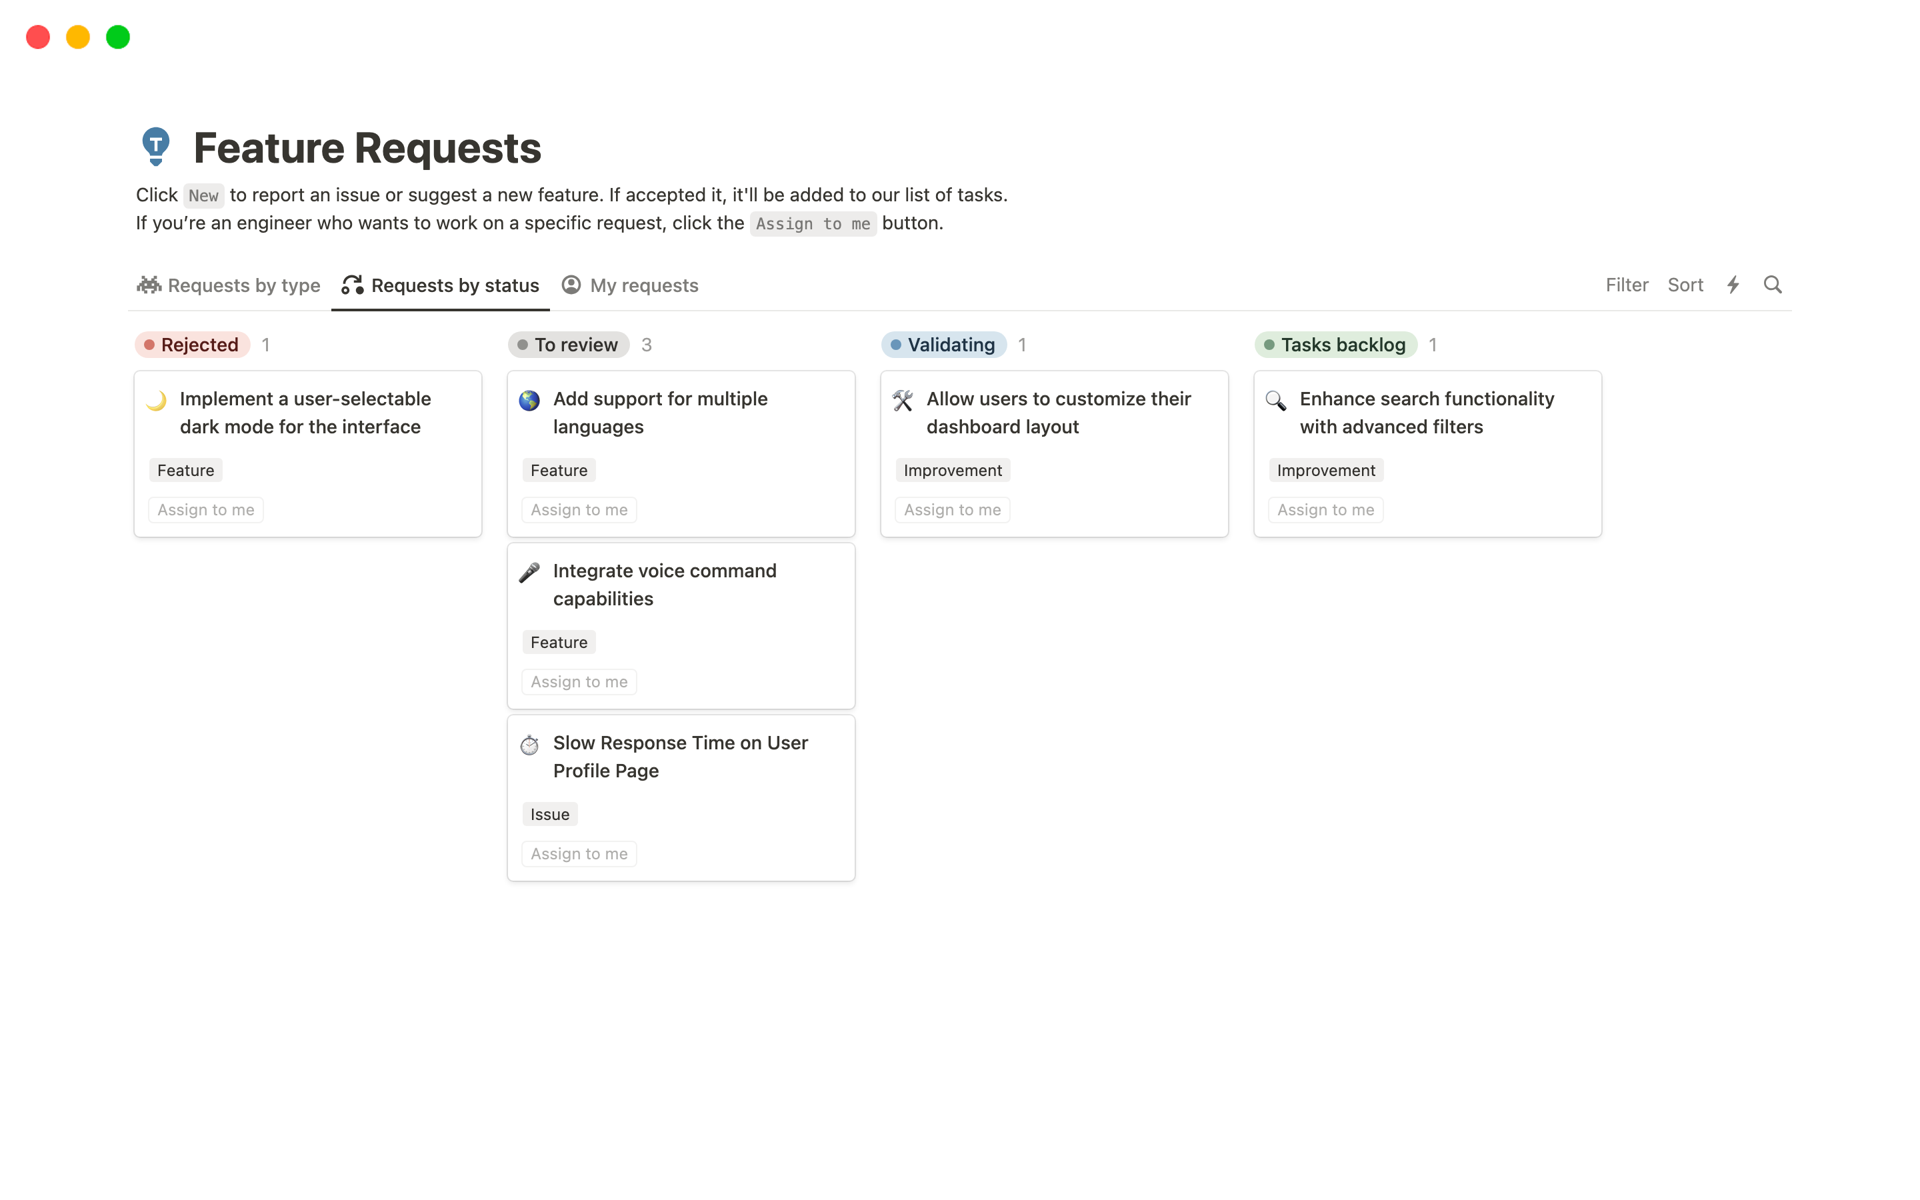 Organize and monitor internal feature requests with our Feature Requests template, complete with various views for enhanced tracking.